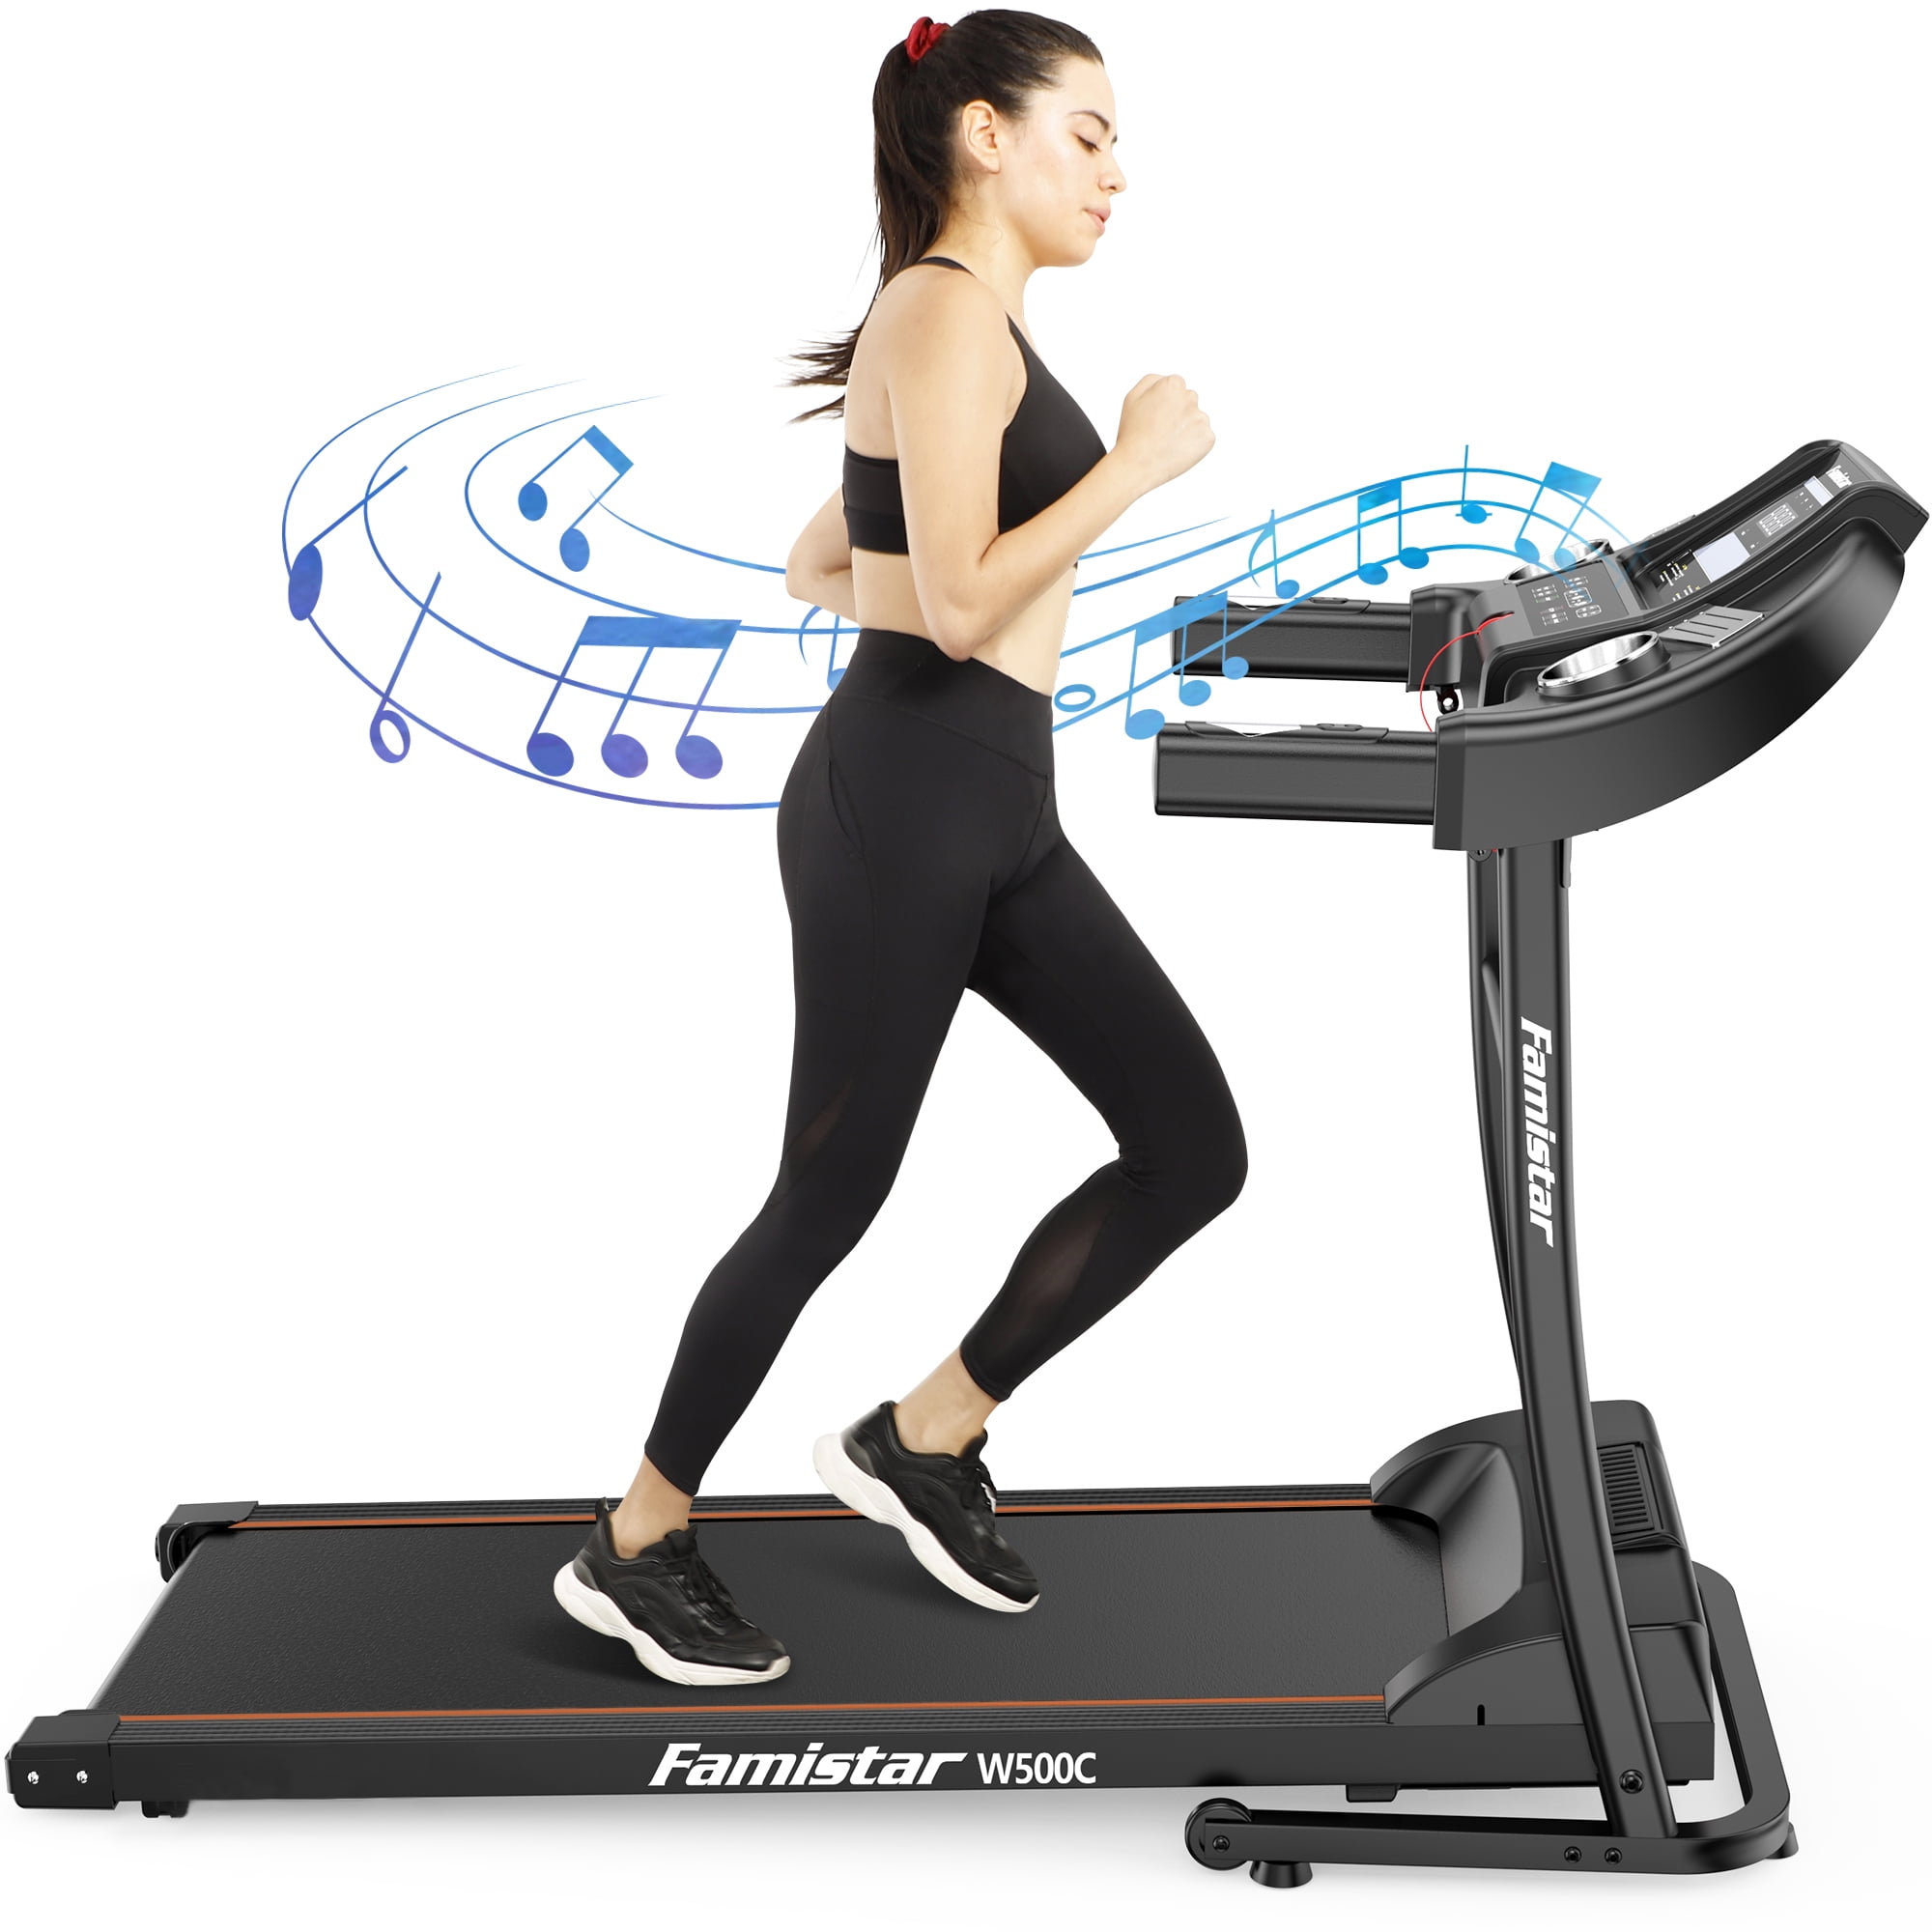 ANCHEER Treadmills,Folding Treadmill for Home,Running Machine with LCD Monitor,Electric Treadmills Pulse Grip and Safe Key,Jogging Walking Exercise Fitness Machine for Family & Office Workout 